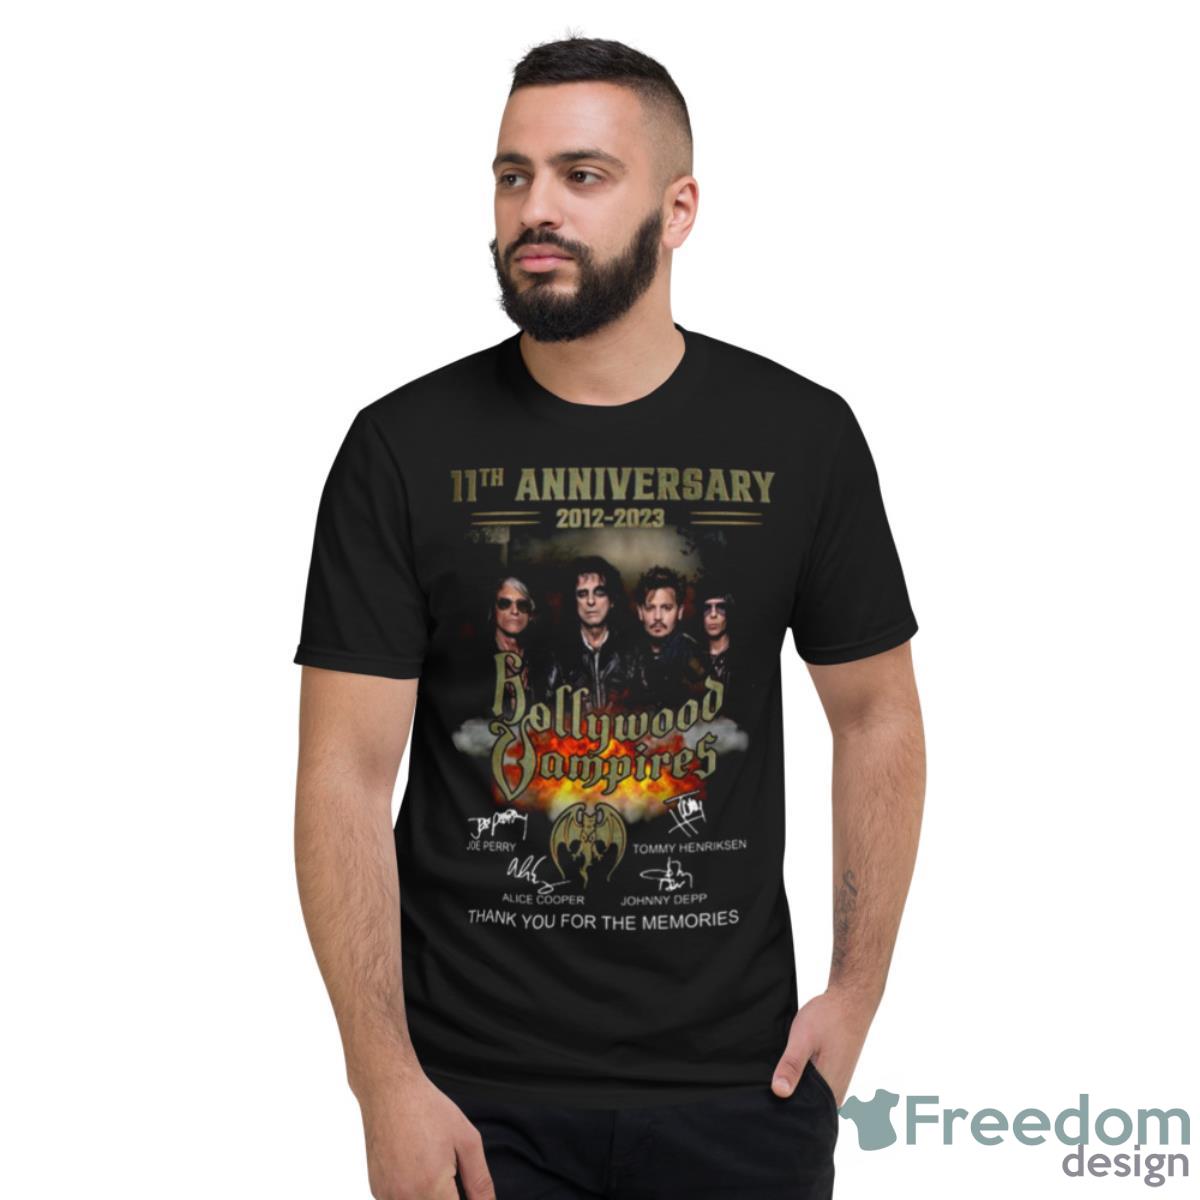 11th Anniversary 2012 2023 Hollywood Vampires Thank You For The Memories Signatures Shirt - Short Sleeve T-Shirt